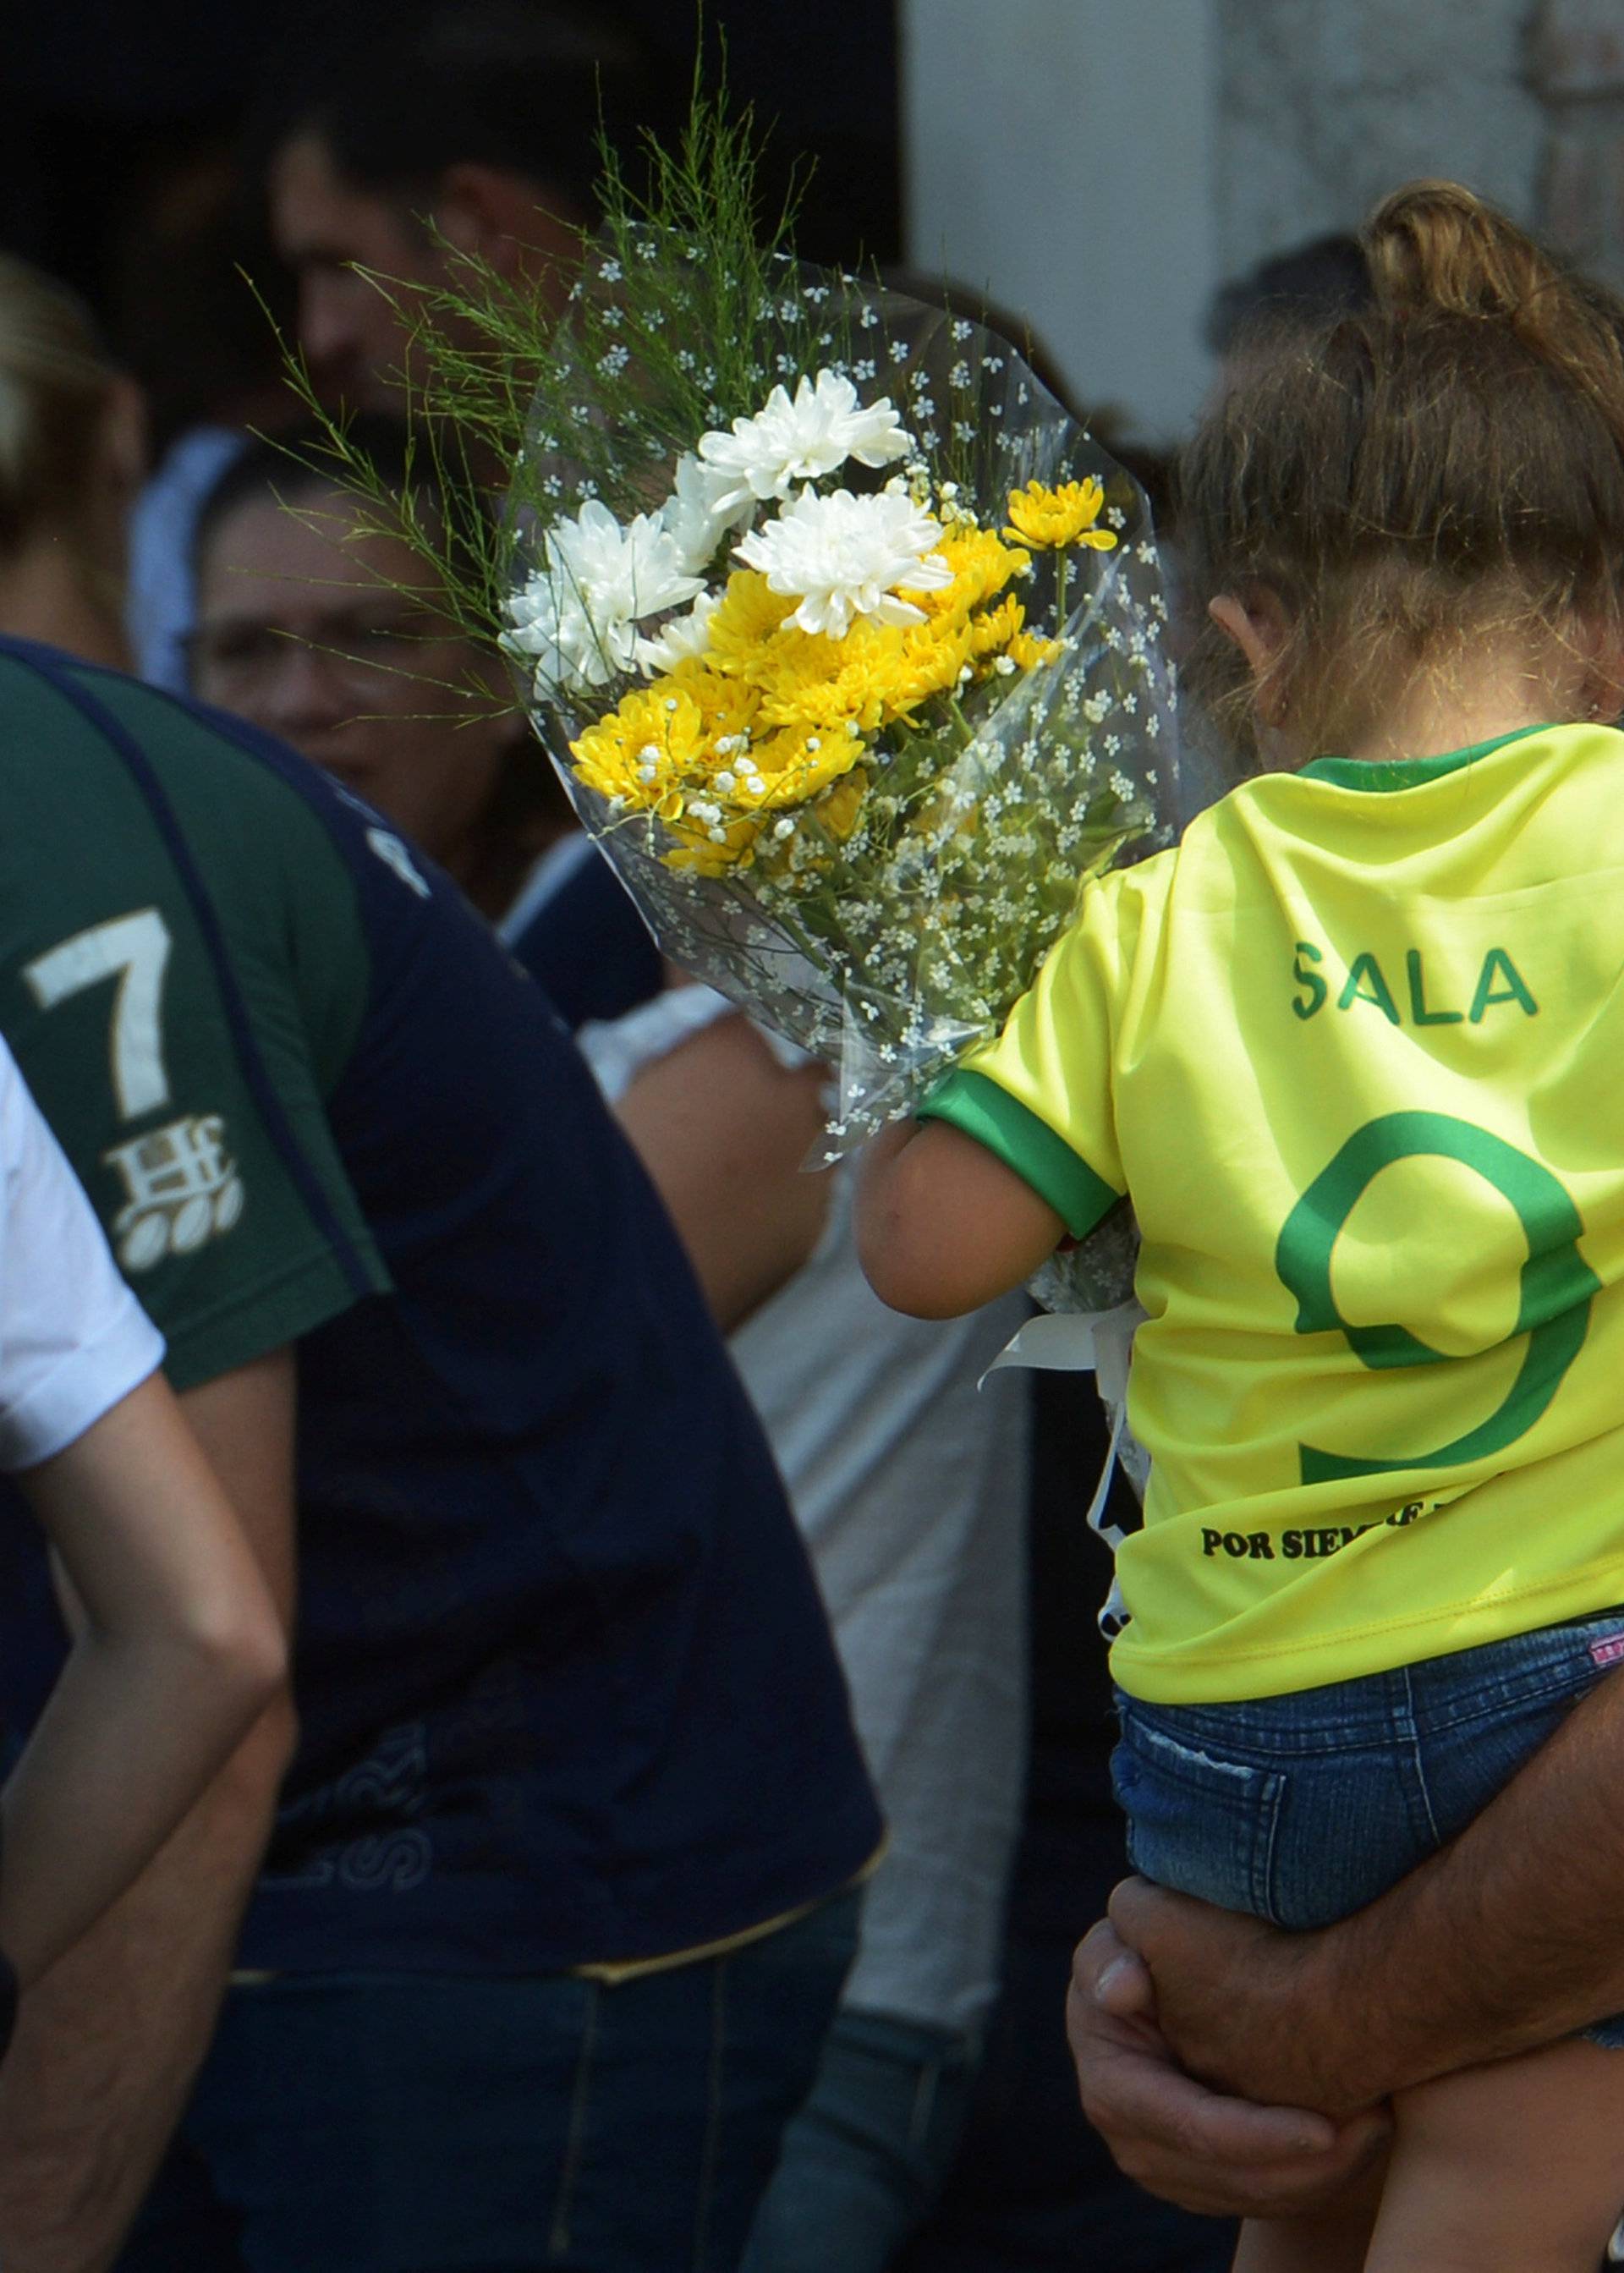 A girl wearing Emiliano Sala's jersey, former striker of French club Nantes, who died in a plane crash in the English Channel, attends his wake in Progreso